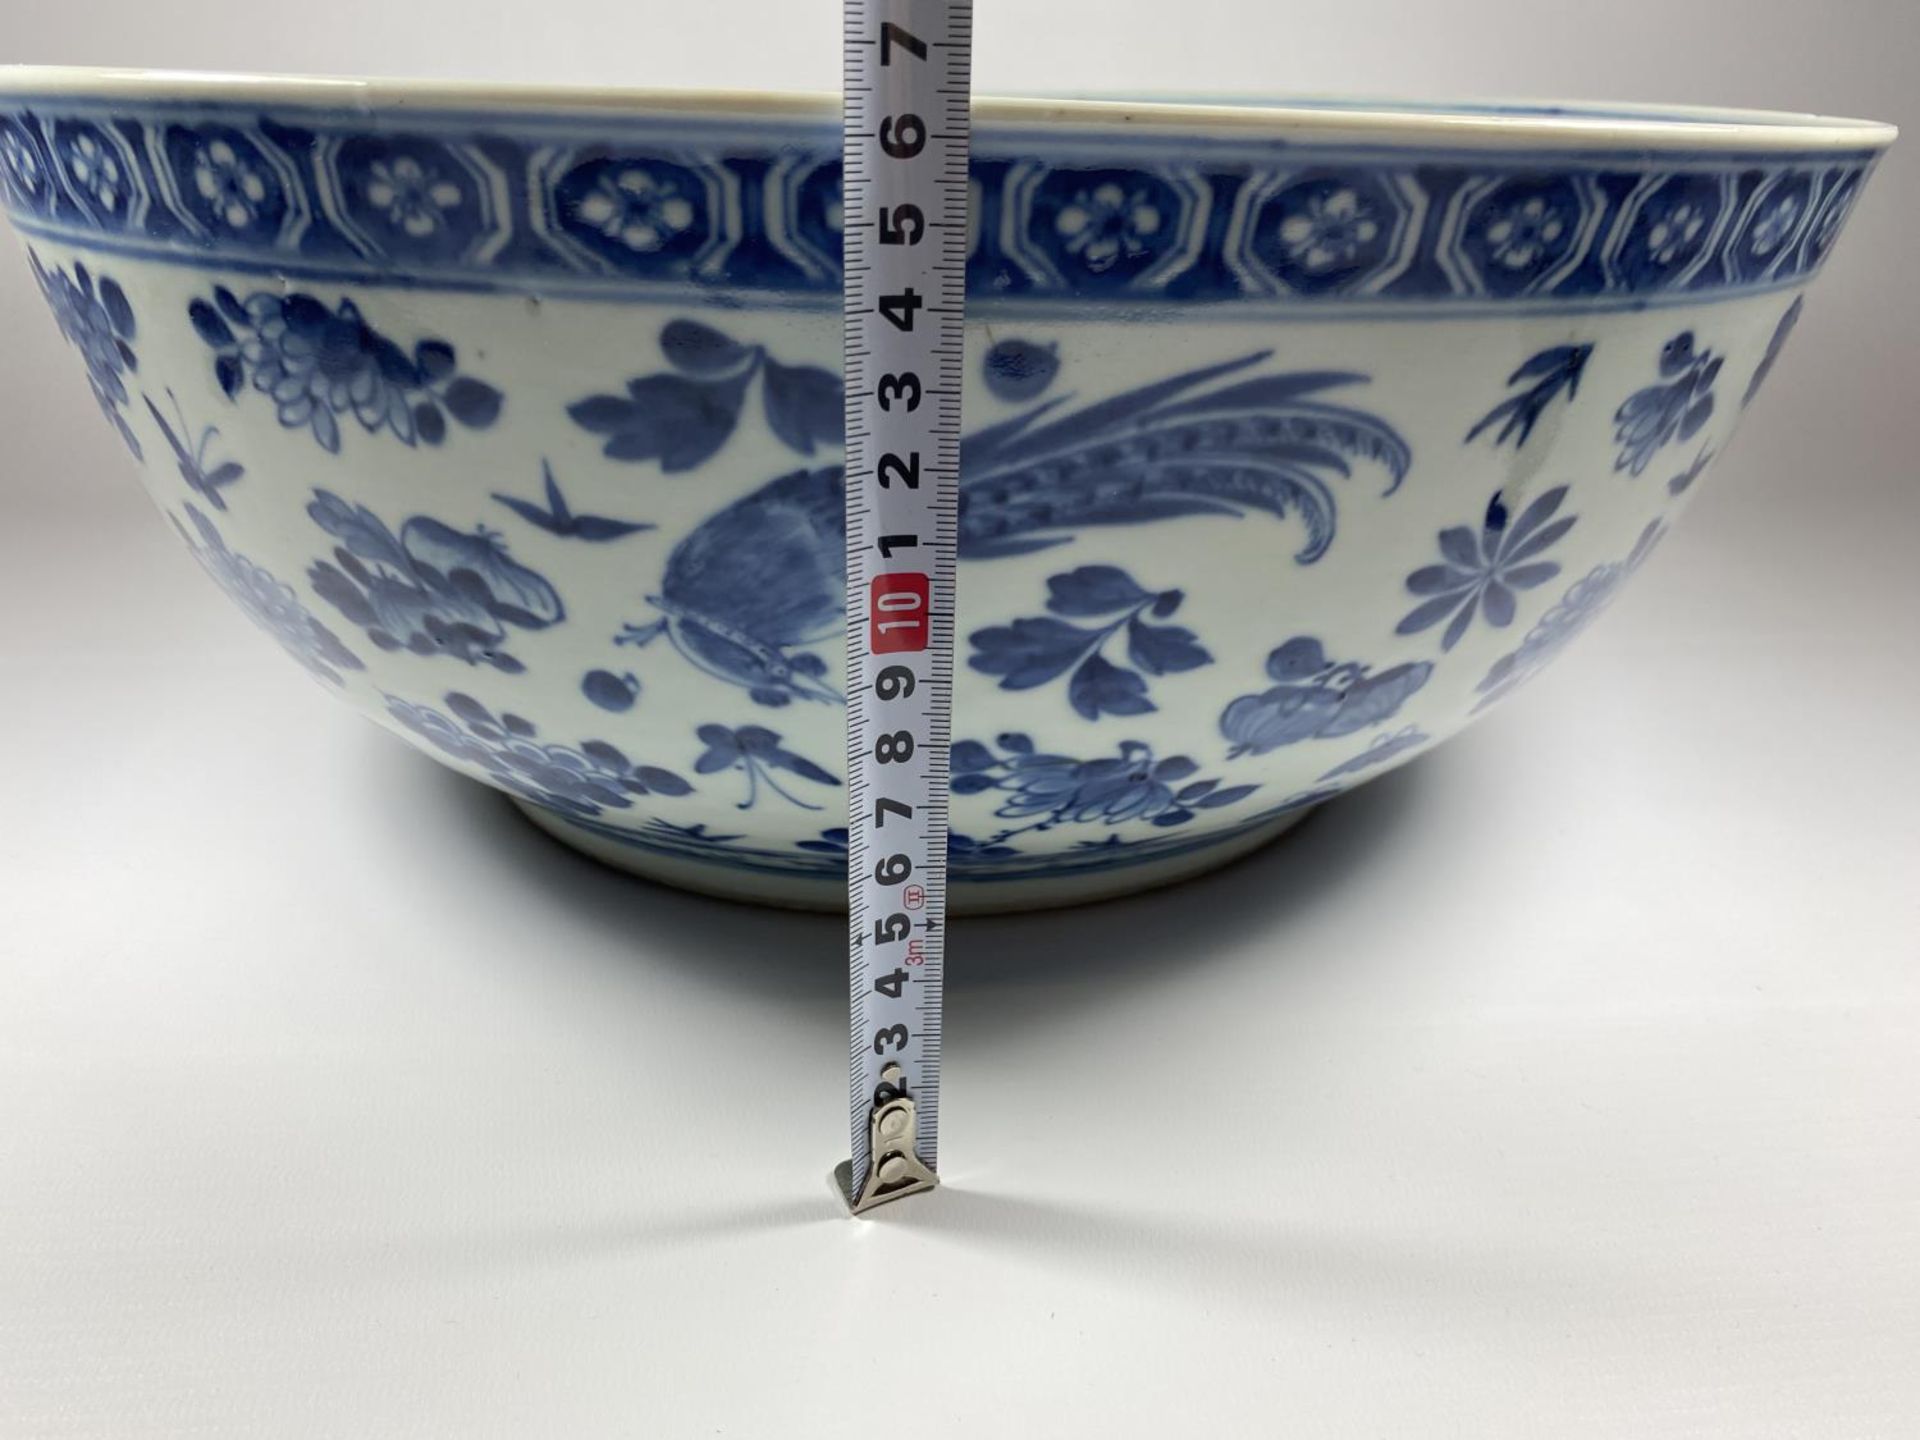 A LARGE AND IMPRESSIVE EARLY 19TH CENTURY CHINESE QING BLUE AND WHITE PORCELAIN PUNCH / FRUIT BOWL - Image 13 of 14